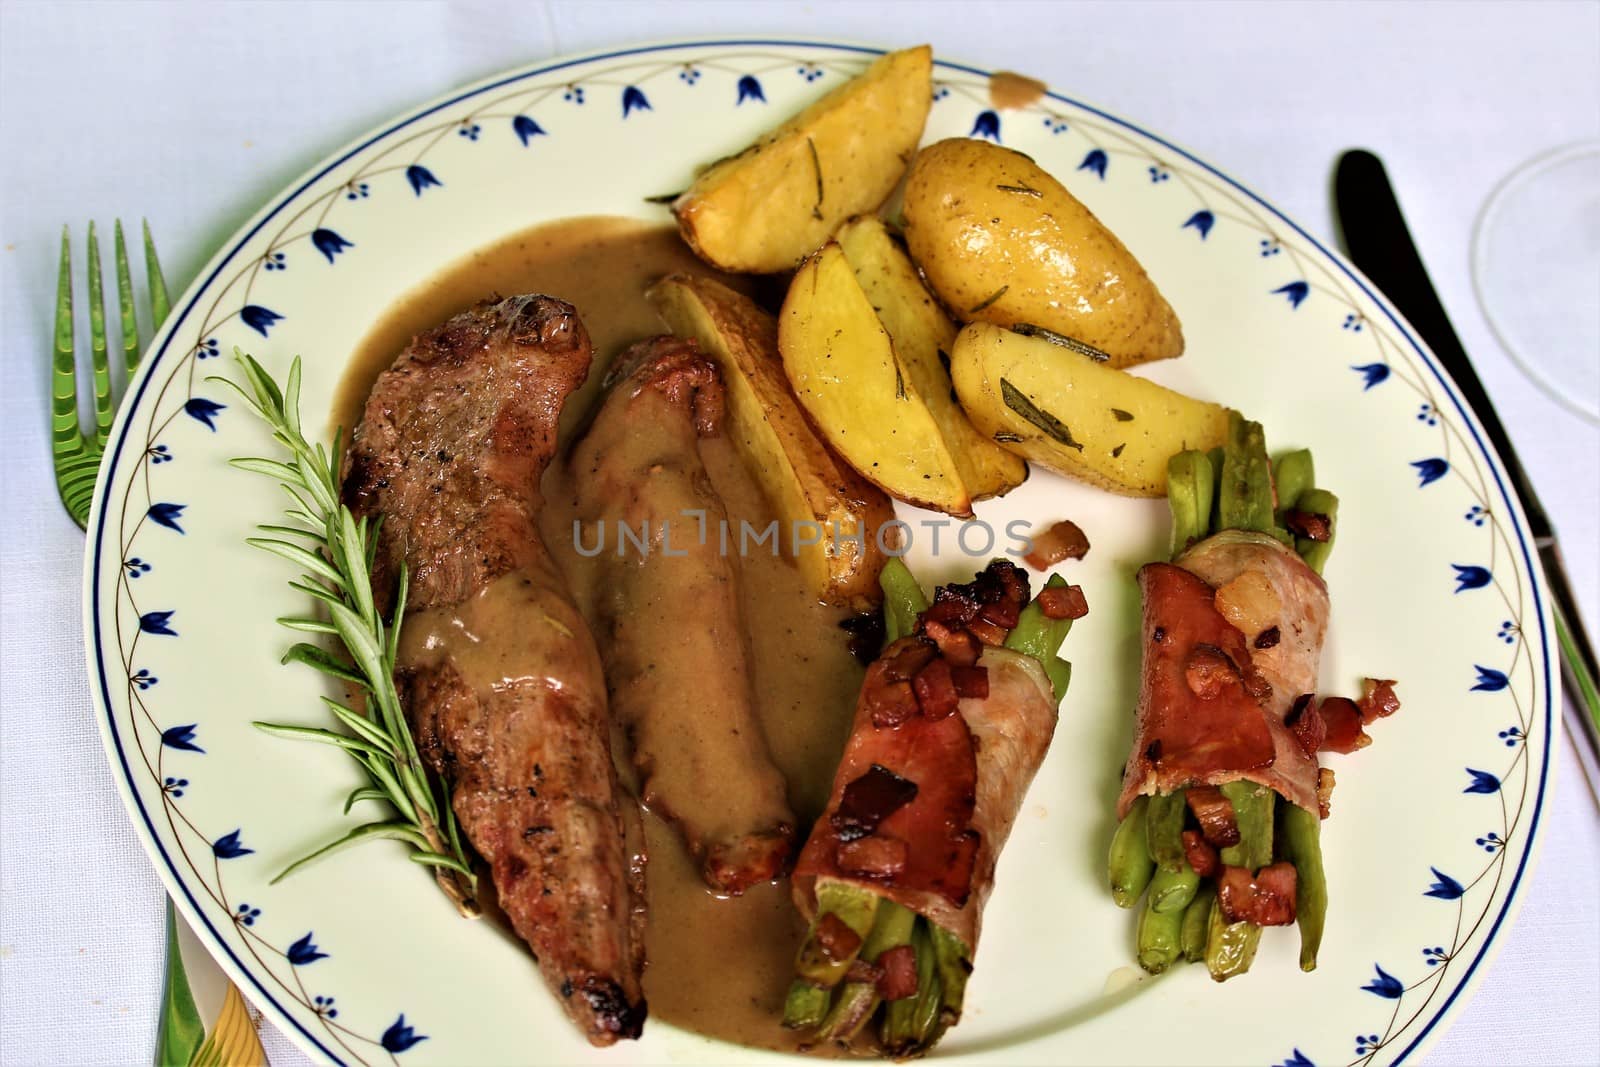 grilled lamb fillet with beans wrapped in bacon and potato wedges on a plate